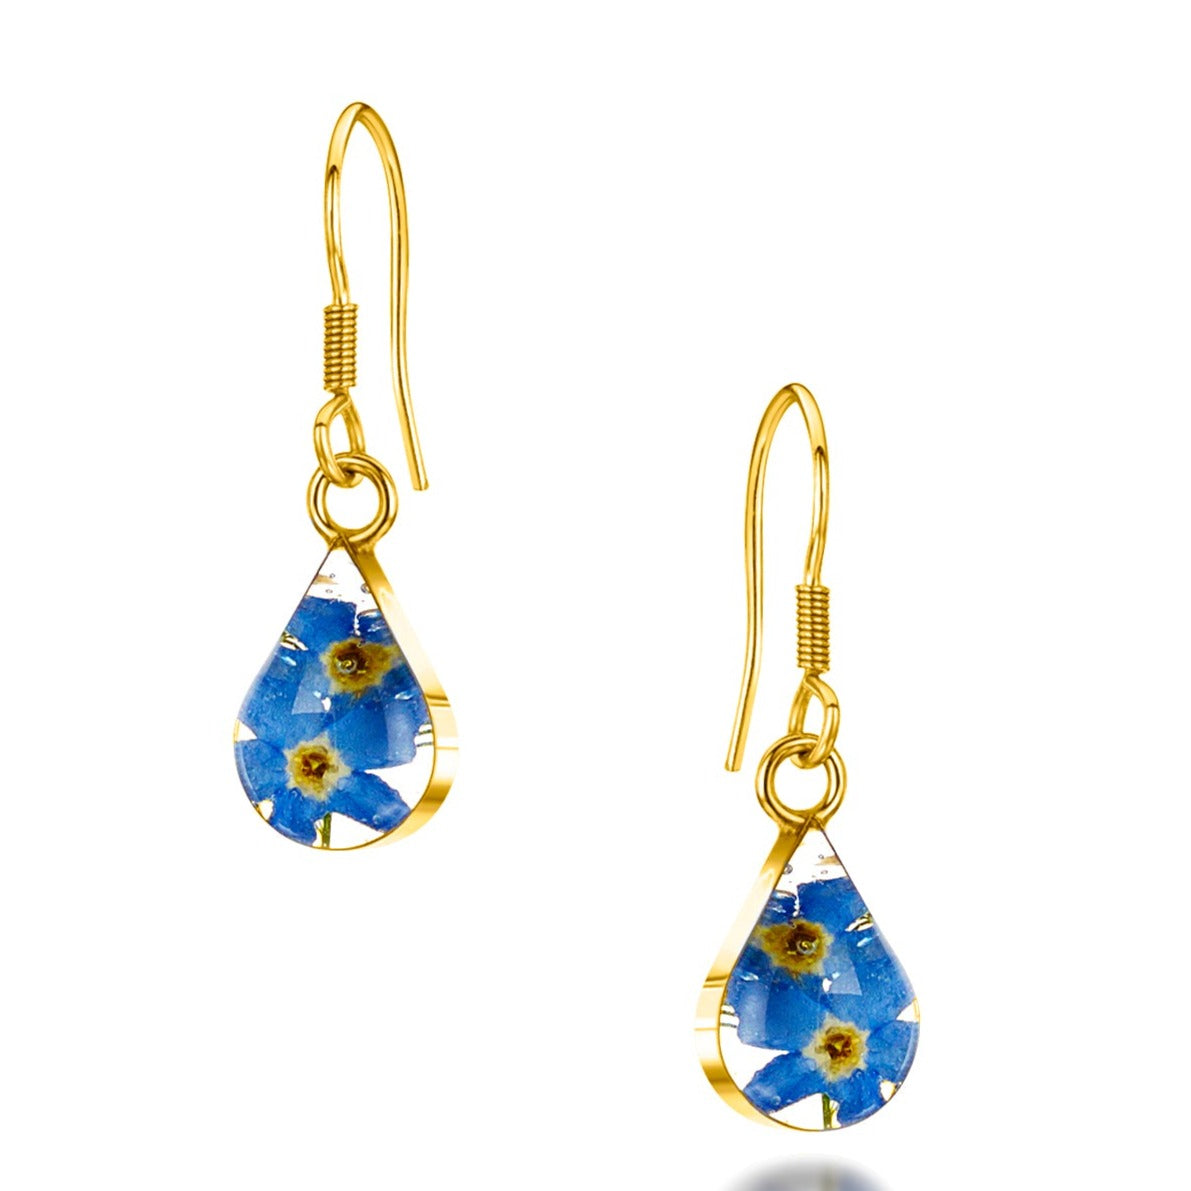 Sterling silver, gold-plated, dangly drop teardrop earrings with real forget-me-not flowers set in resin.